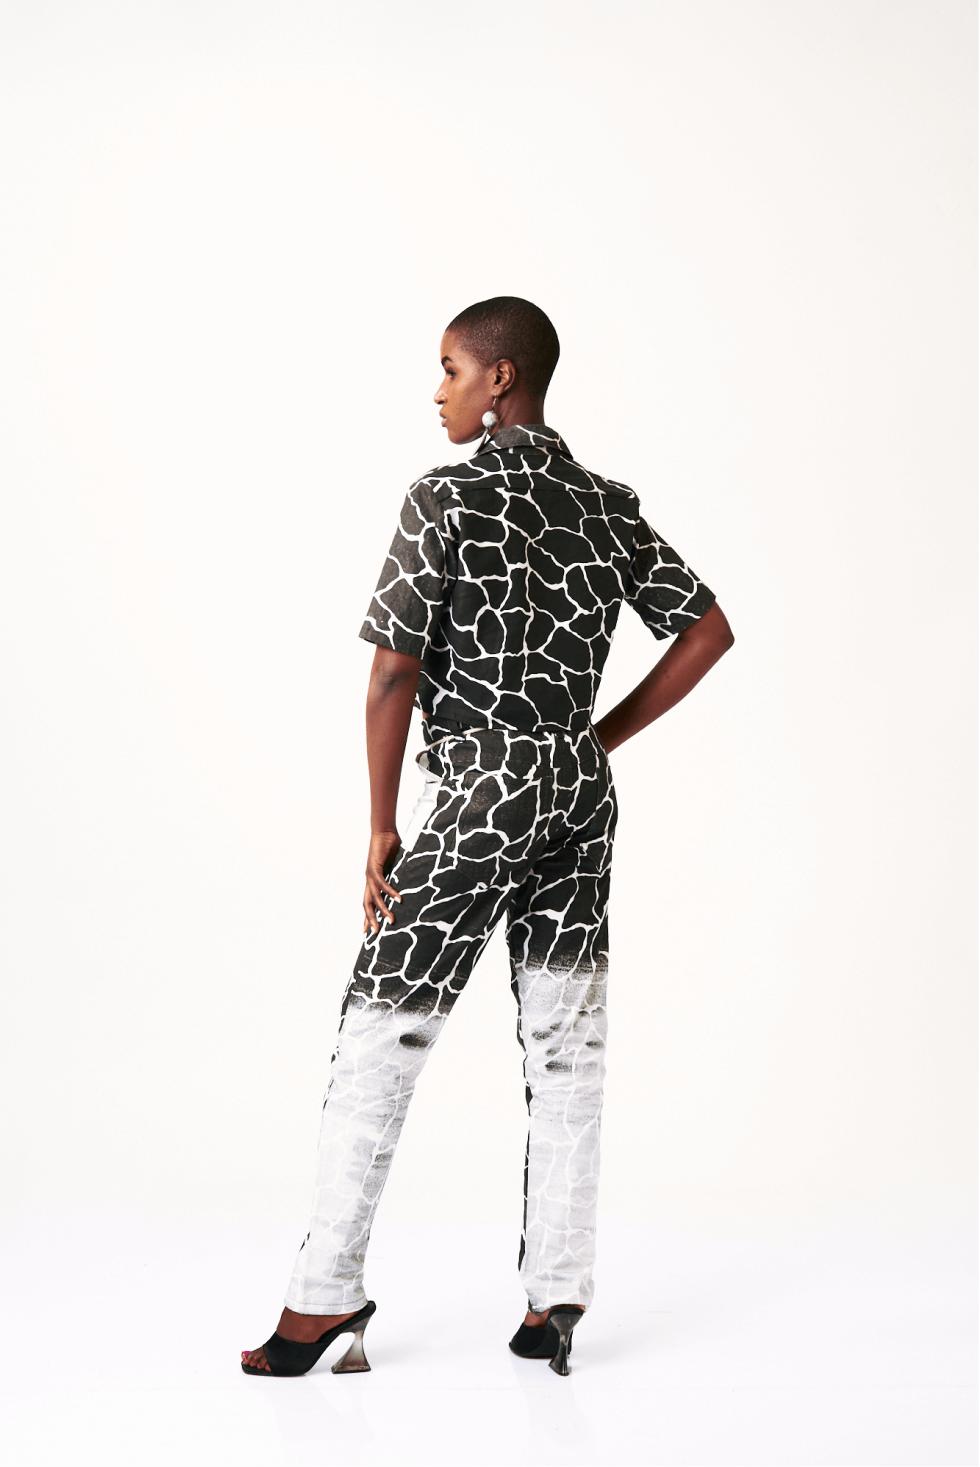 Shop Twiga Print Pants by Nairobi Apparel District on Arrai. Discover stylish, affordable clothing, jewelry, handbags and unique handmade pieces from top Kenyan & African fashion brands prioritising sustainability and quality craftsmanship.